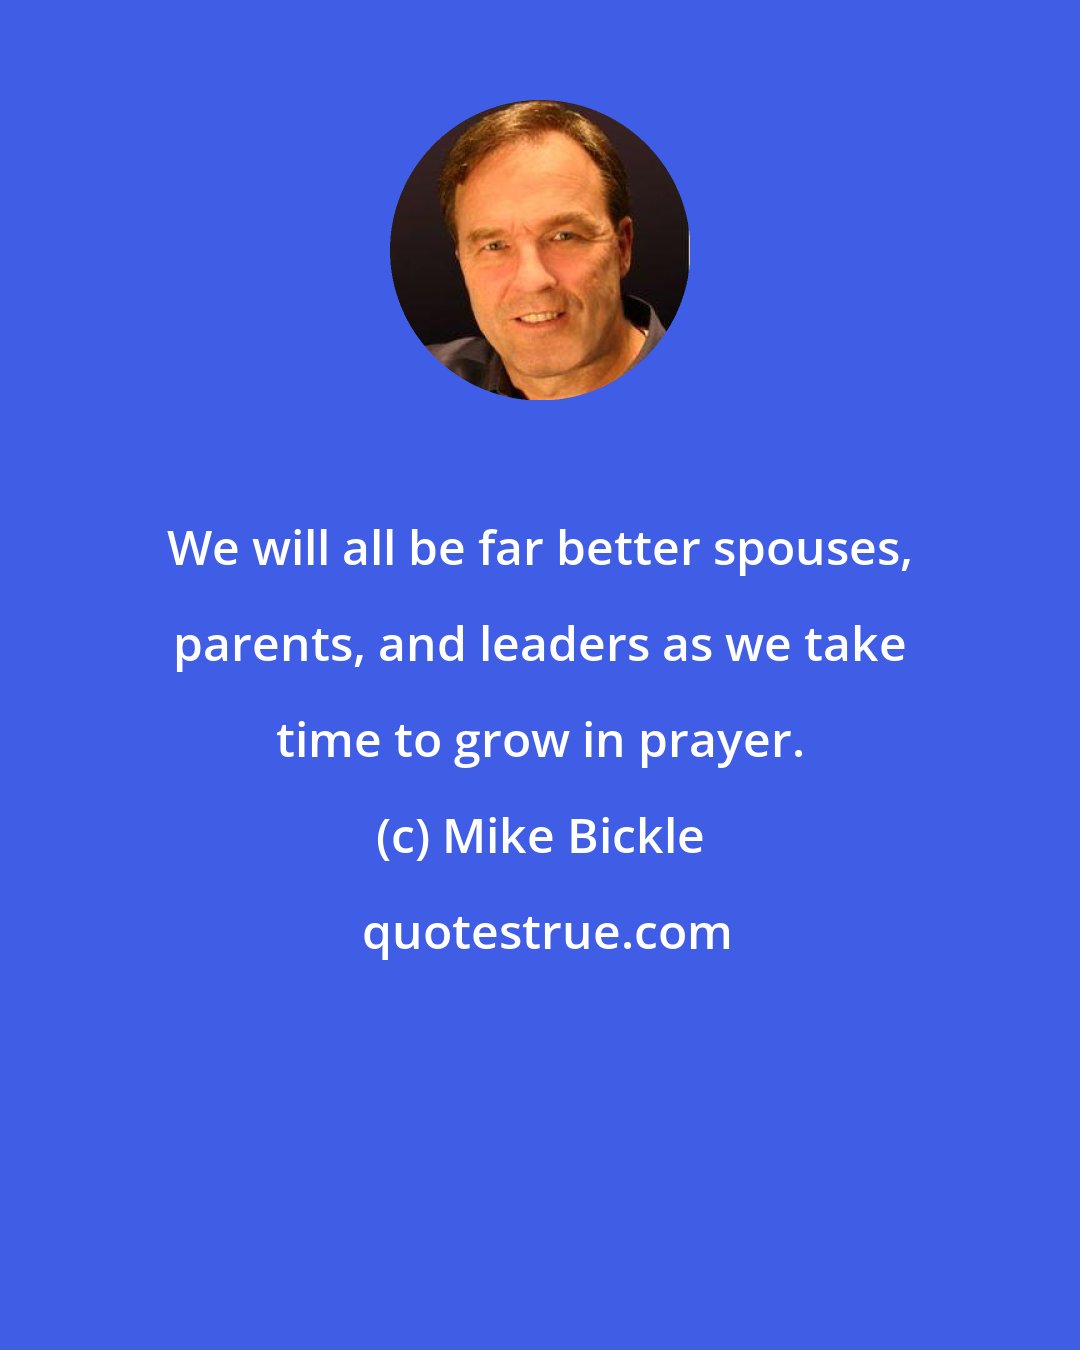 Mike Bickle: We will all be far better spouses, parents, and leaders as we take time to grow in prayer.